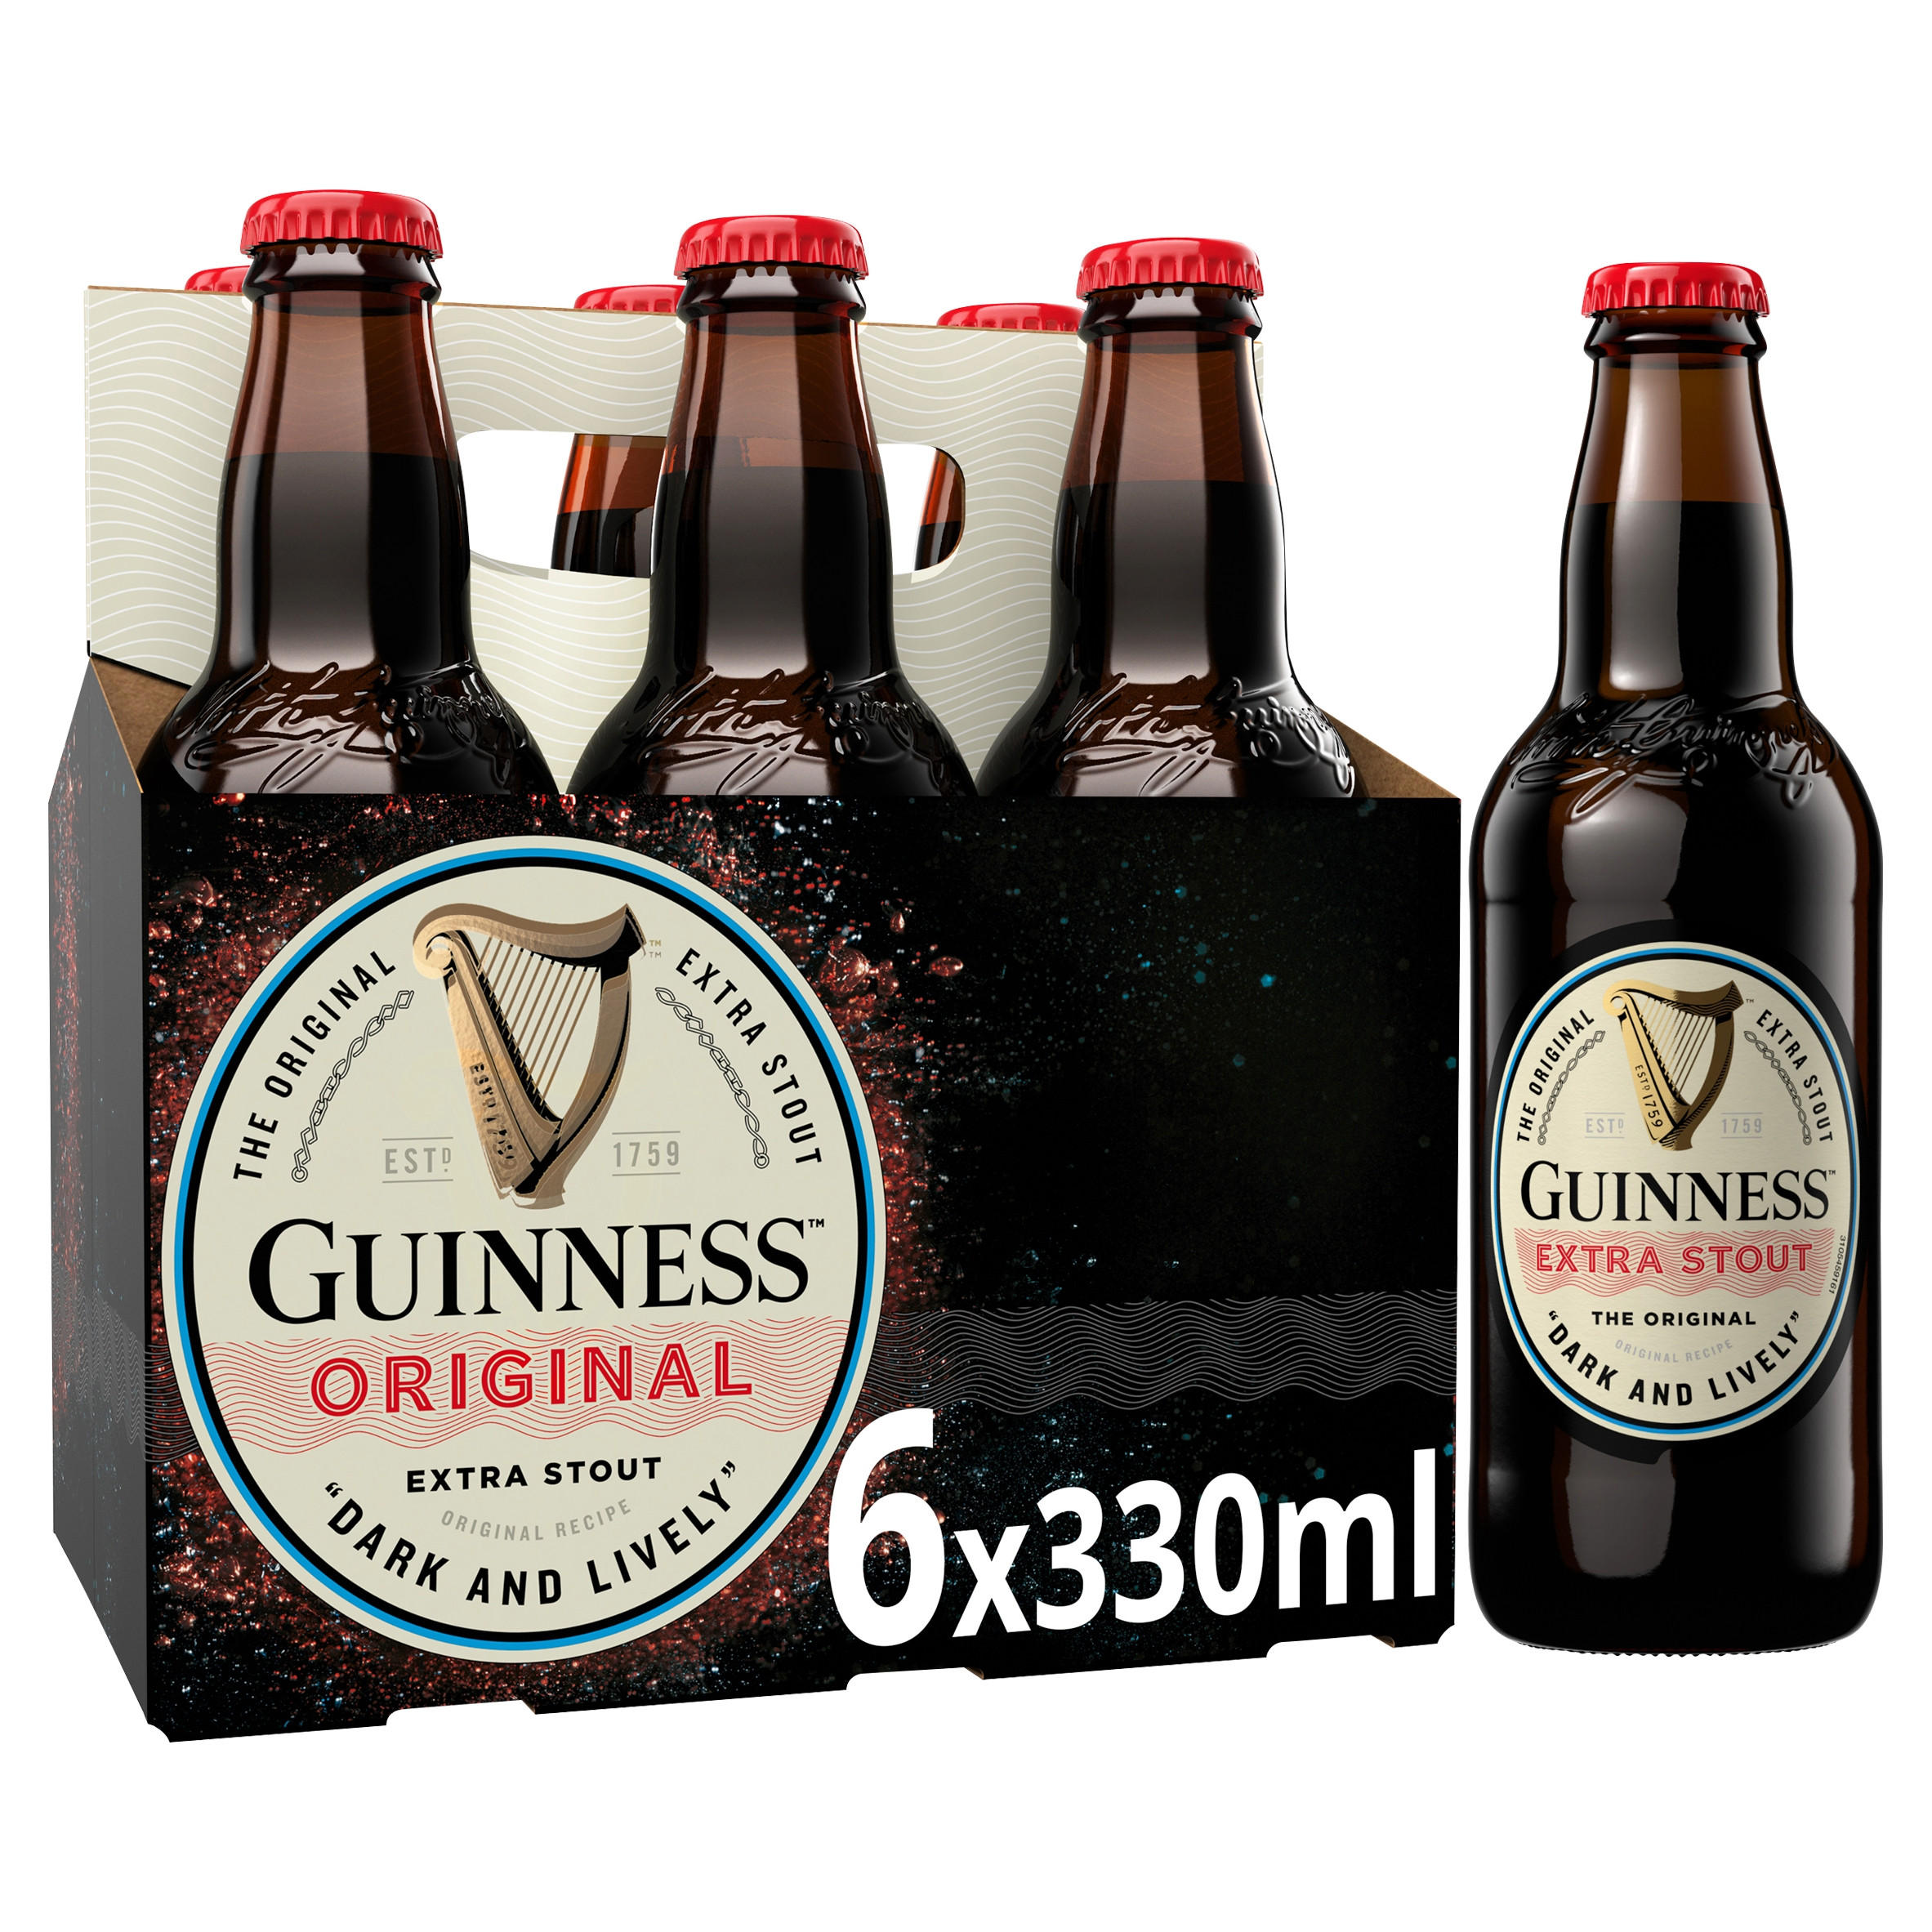 Guinness Original Extra Stout Dark And Lively 6 X 330ml Beer